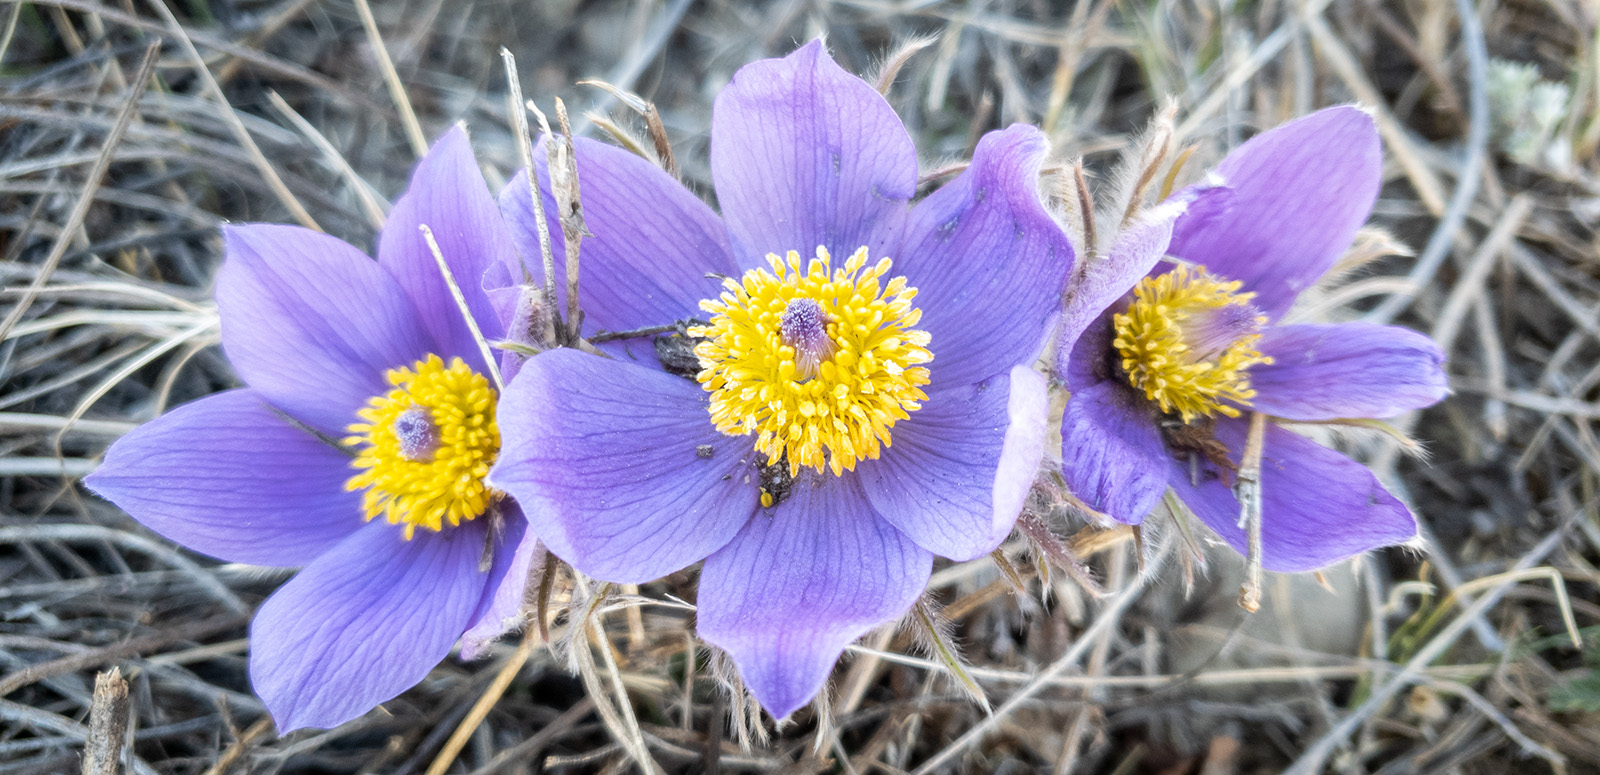 Spring arrives in Alberta with the emergence of the Prairie Crocus each April, perfectly coinciding with Earth Day | Darwin Wiggett | oopoomoo
